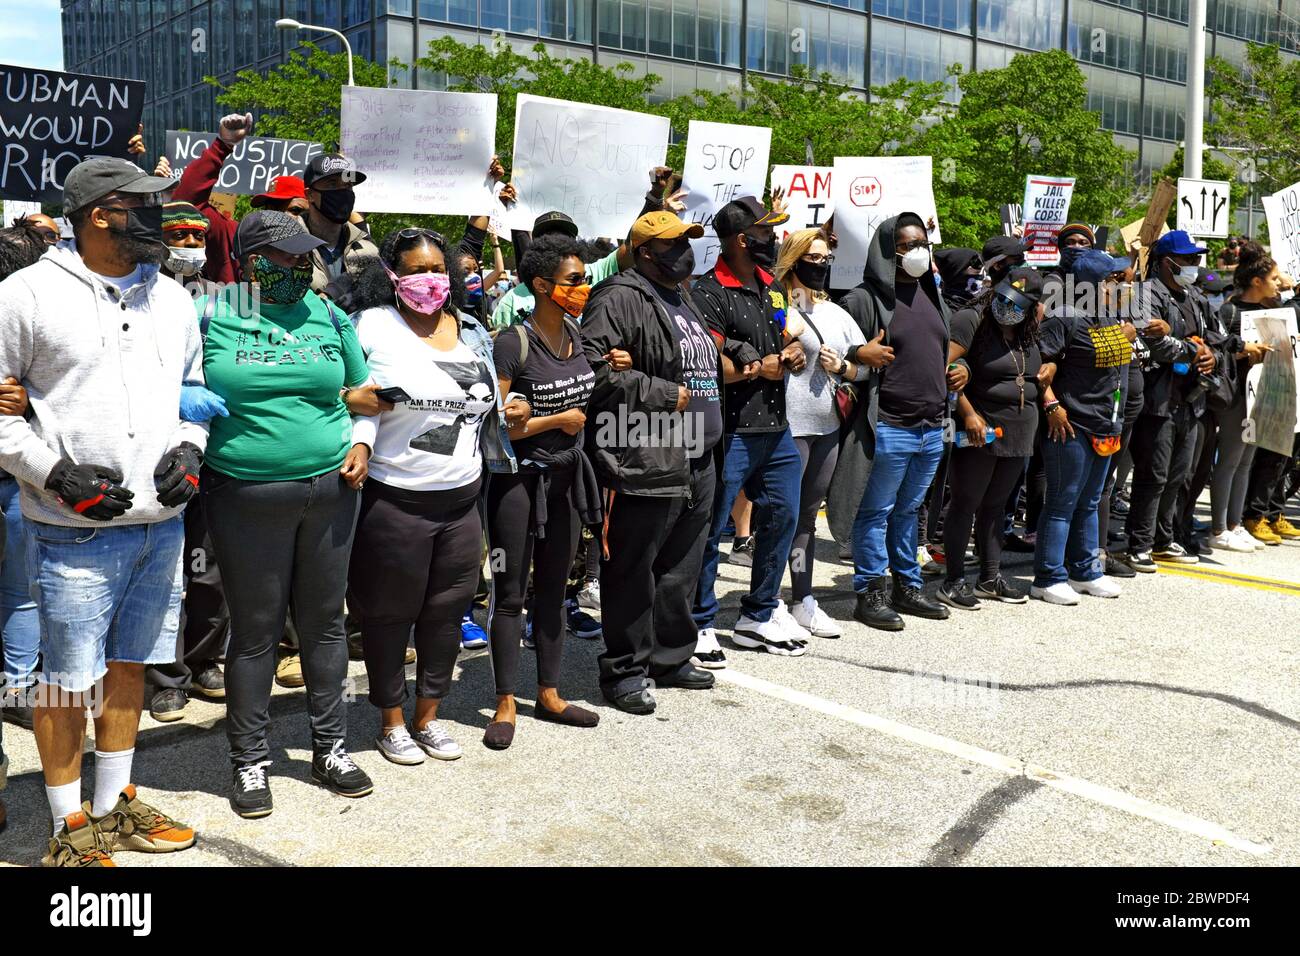 Protesters prepare to march down Lakeside Ave. in Cleveland, Ohio to protest the killing of black people by police in the USA. Stock Photo